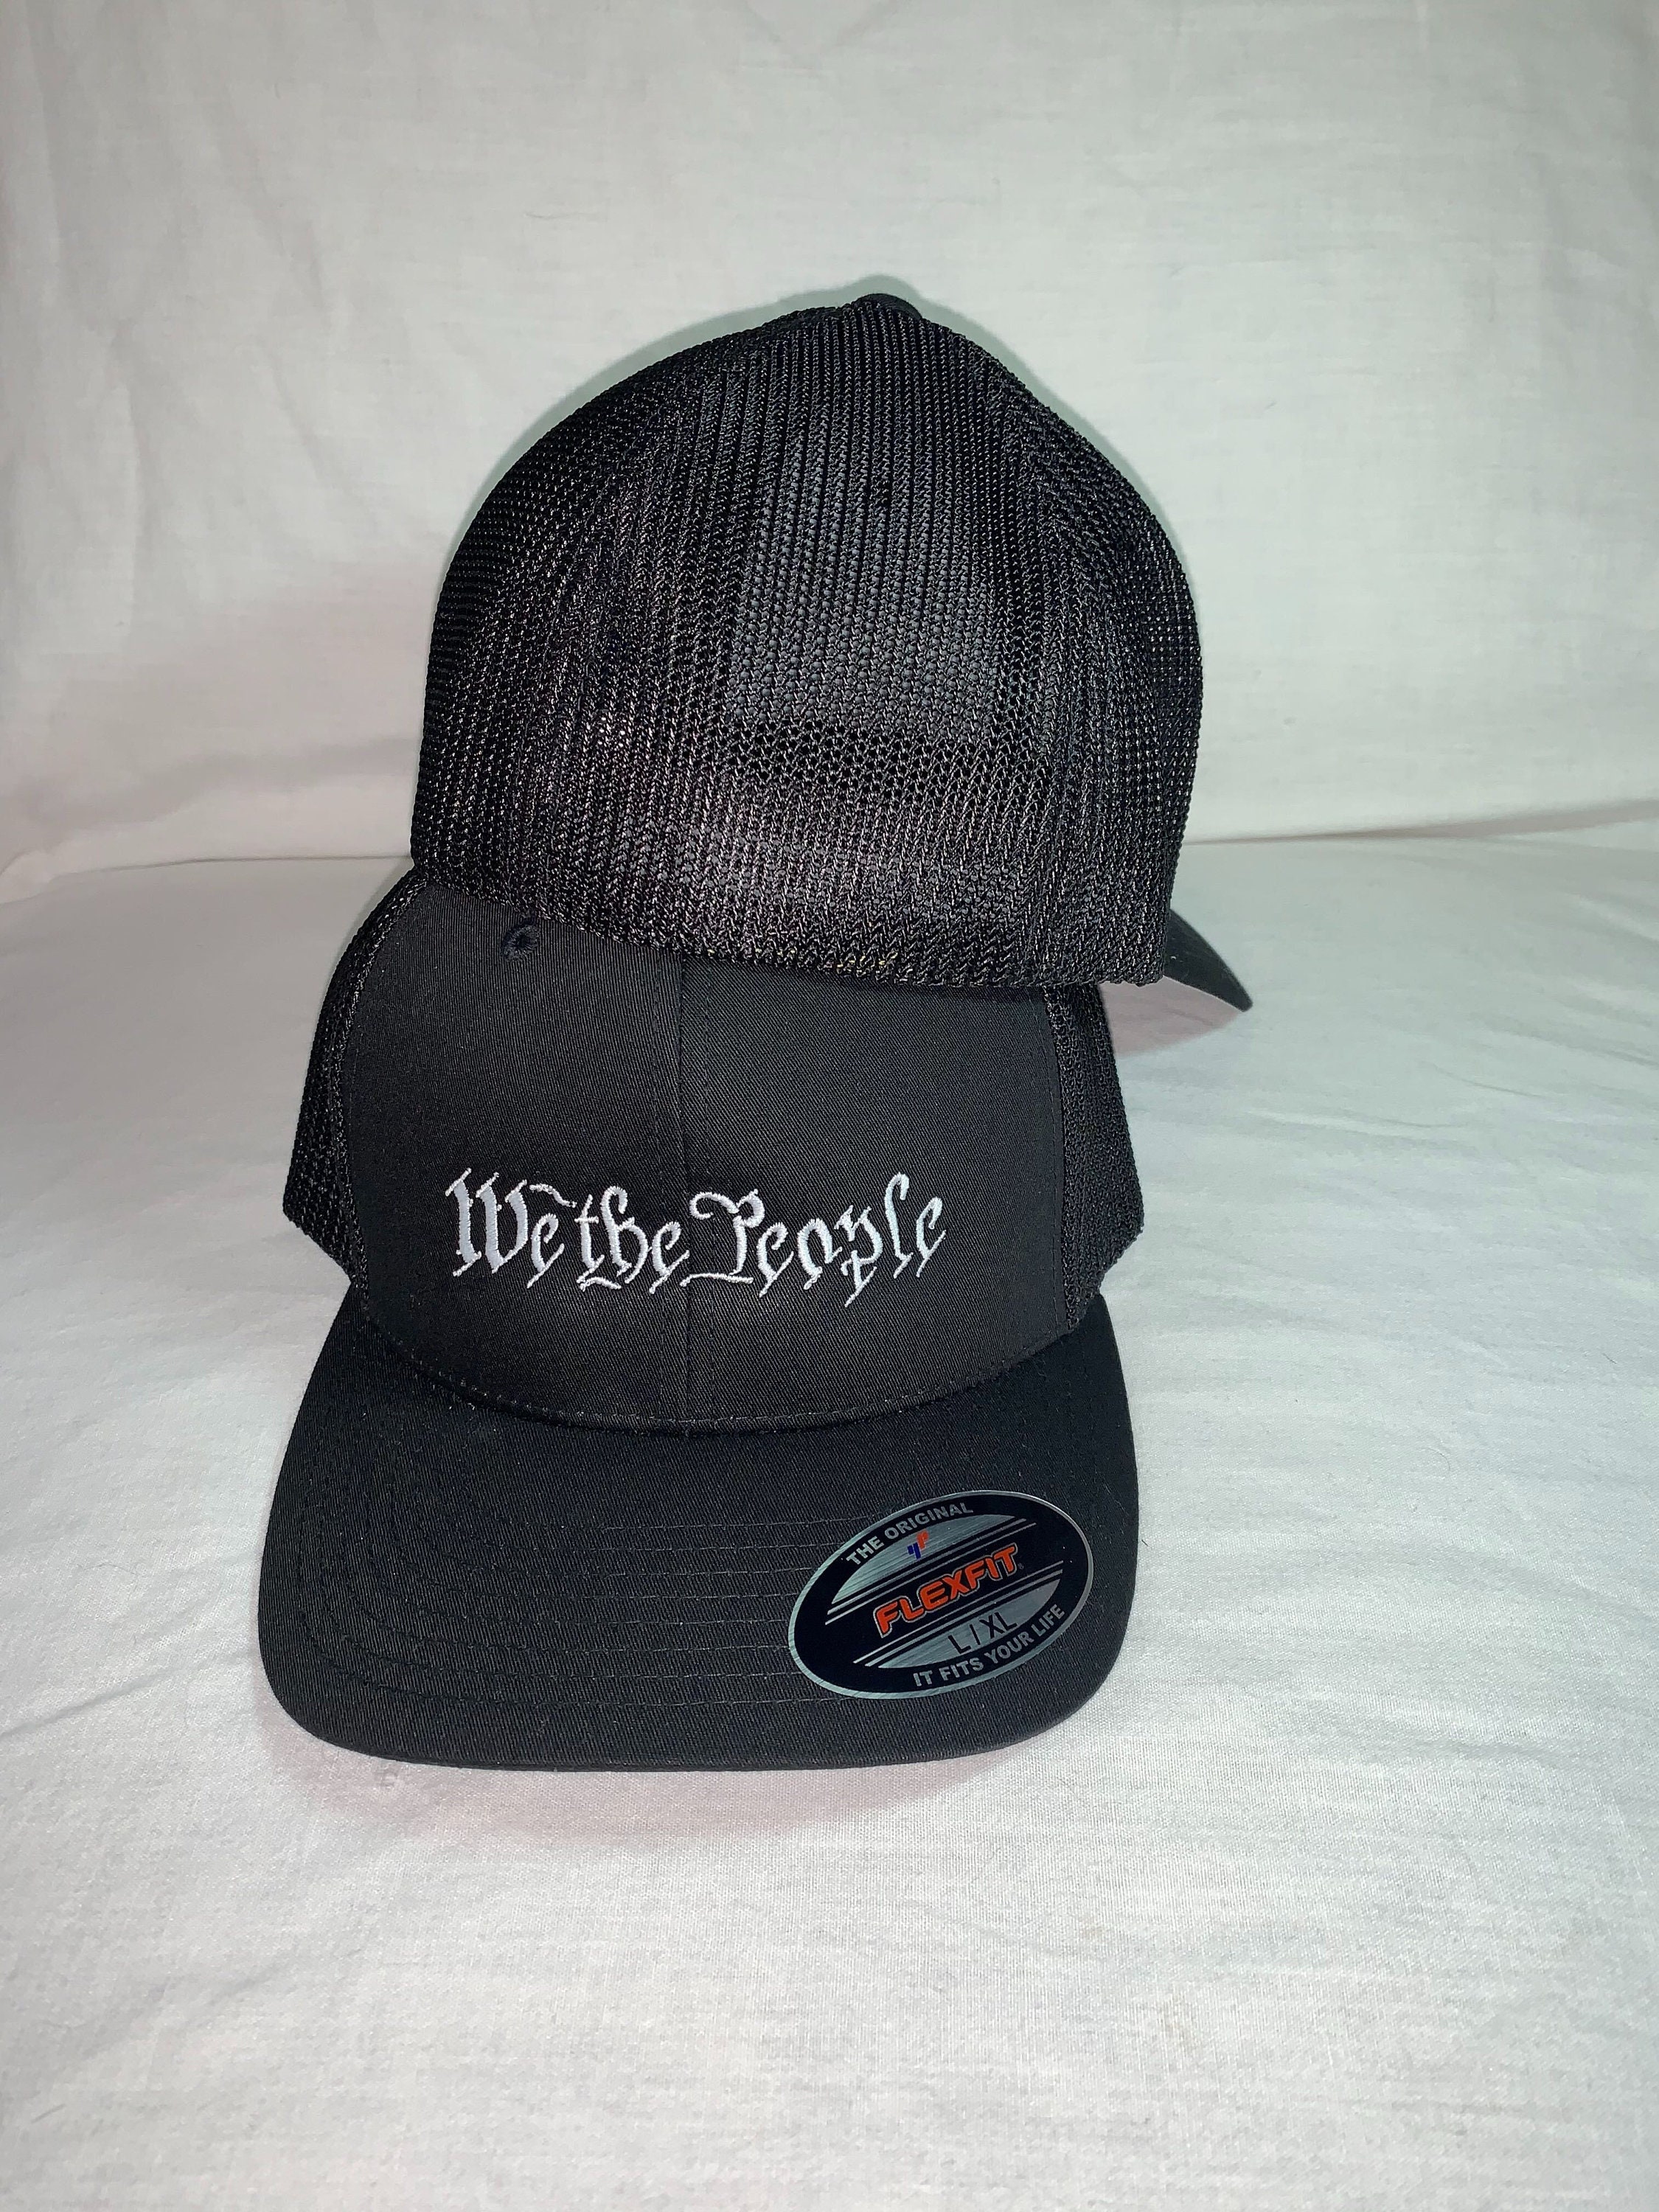 We the People Flex-fit Hat, United States Constitution Preamble - Etsy